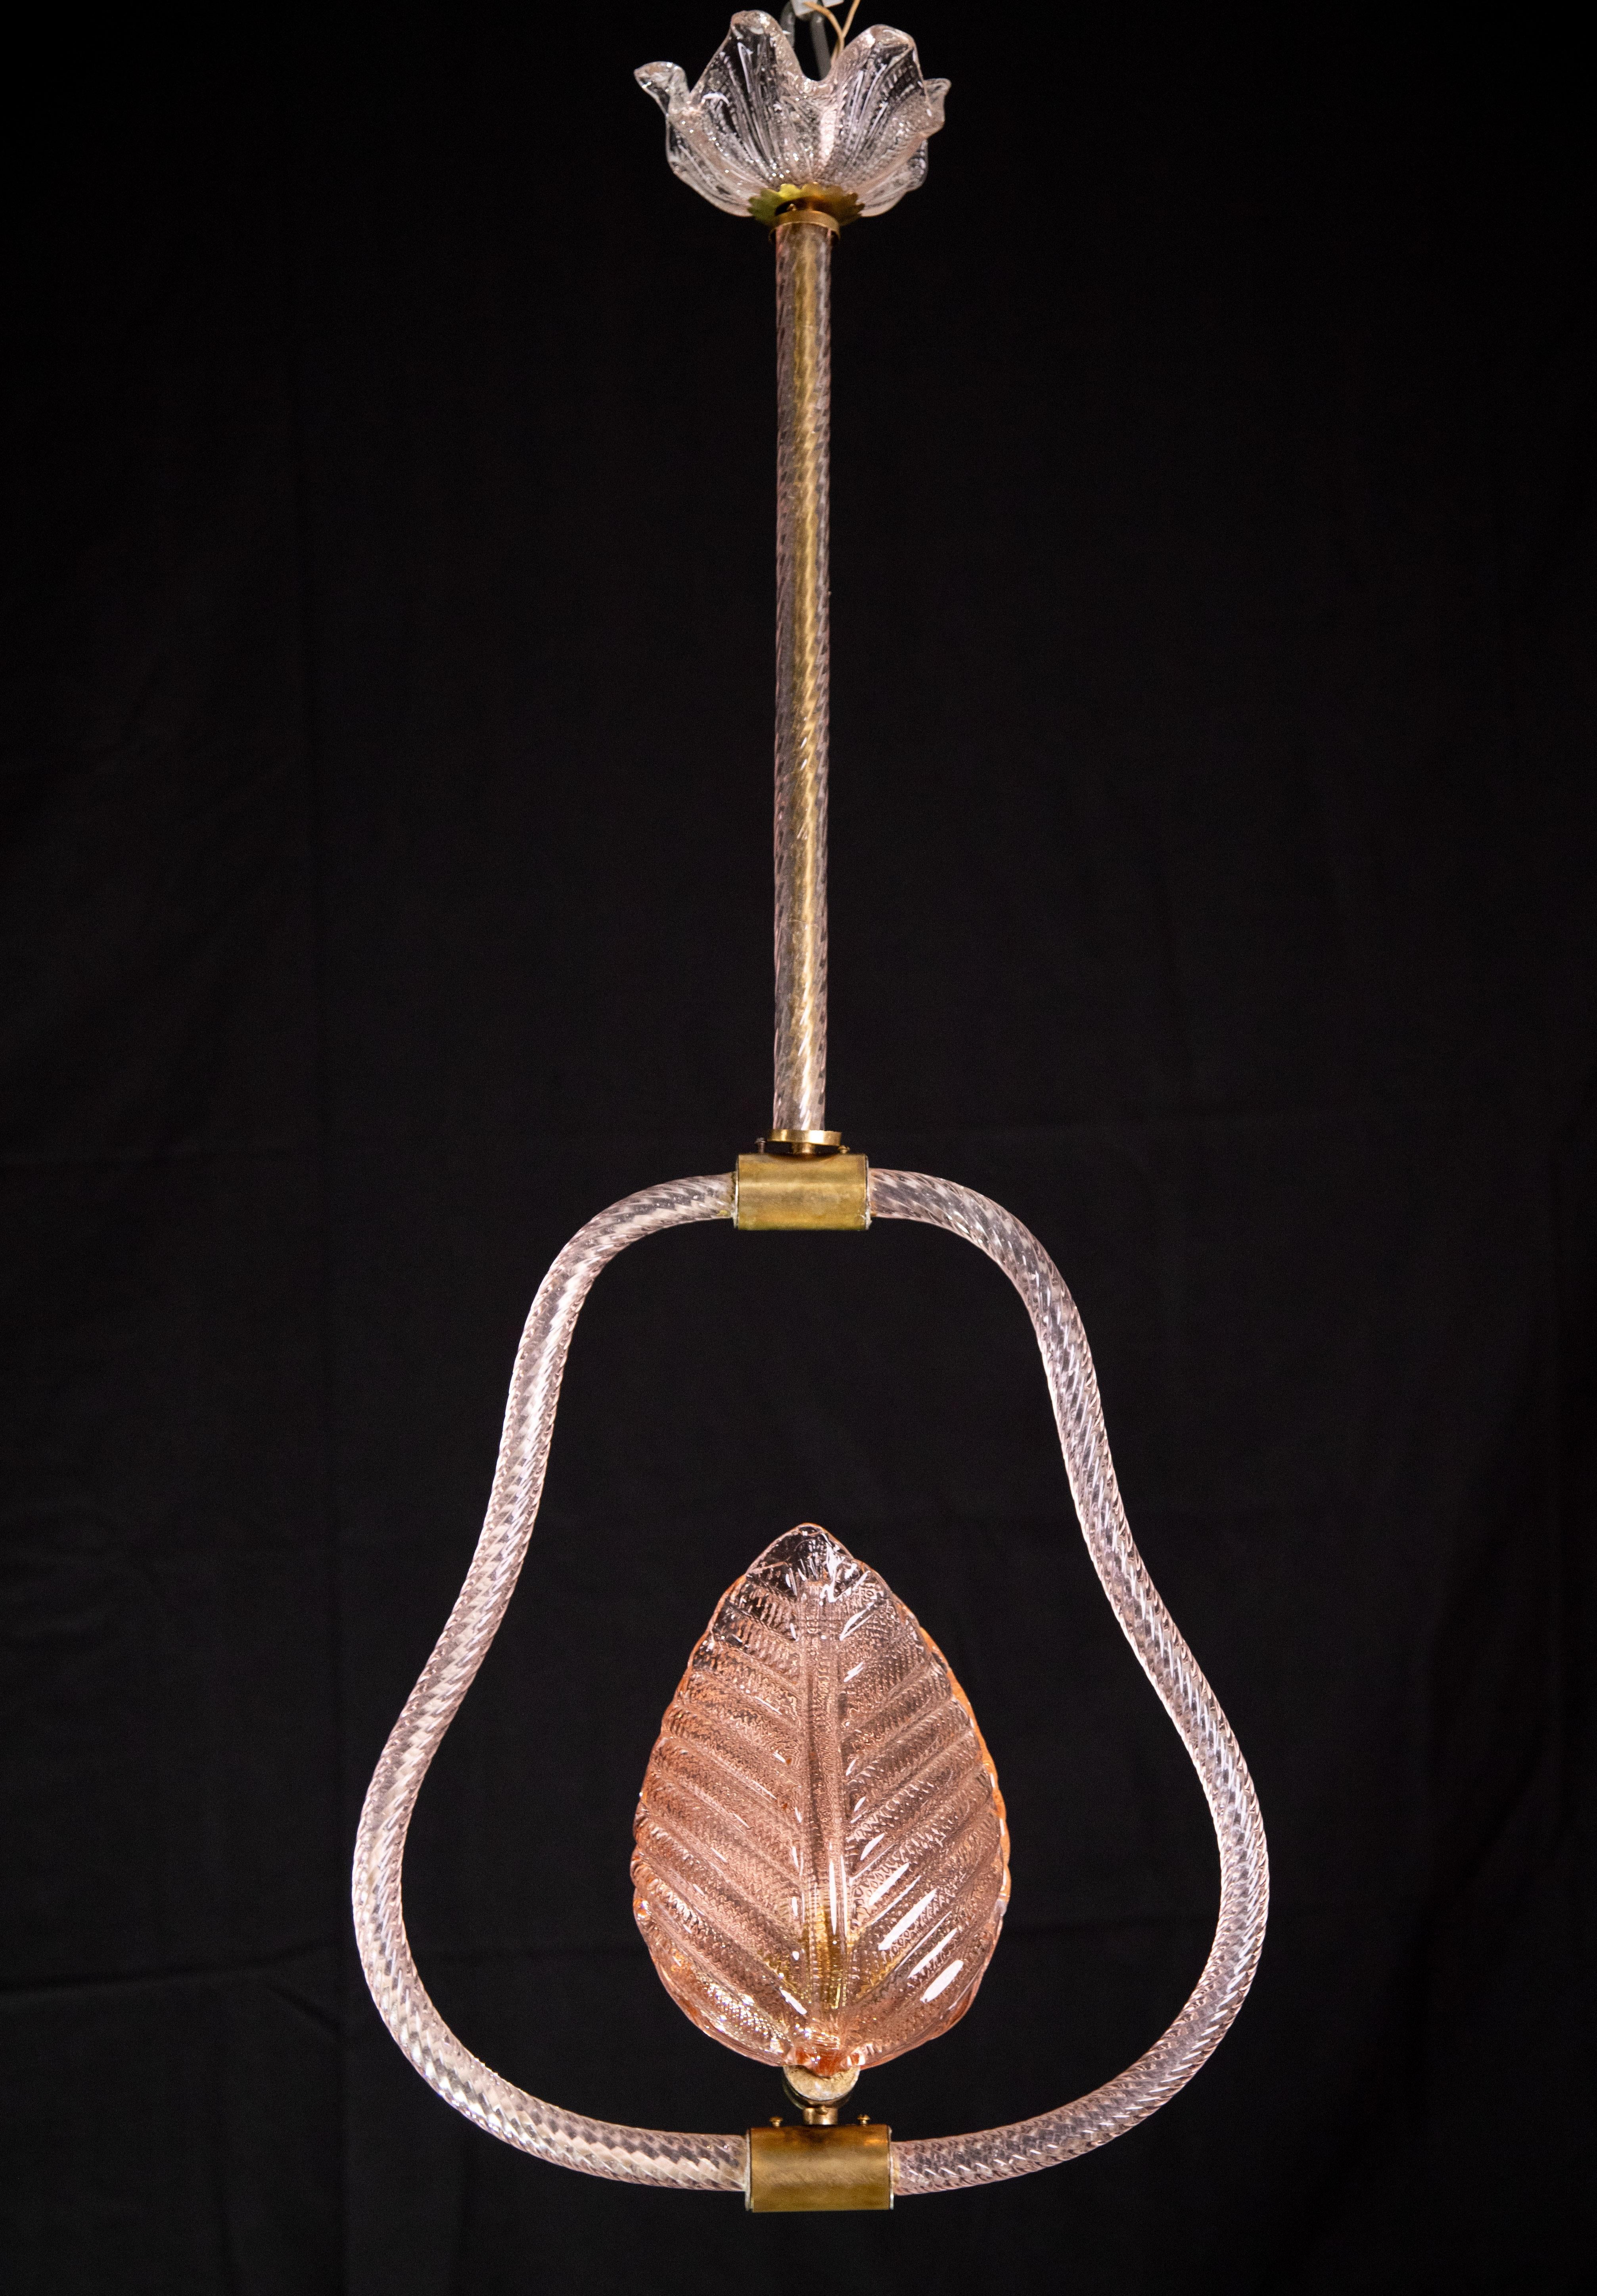 Elegant Rare Pink Murano Glass Chandelier by Barovier & Toso, 1950s For Sale 5